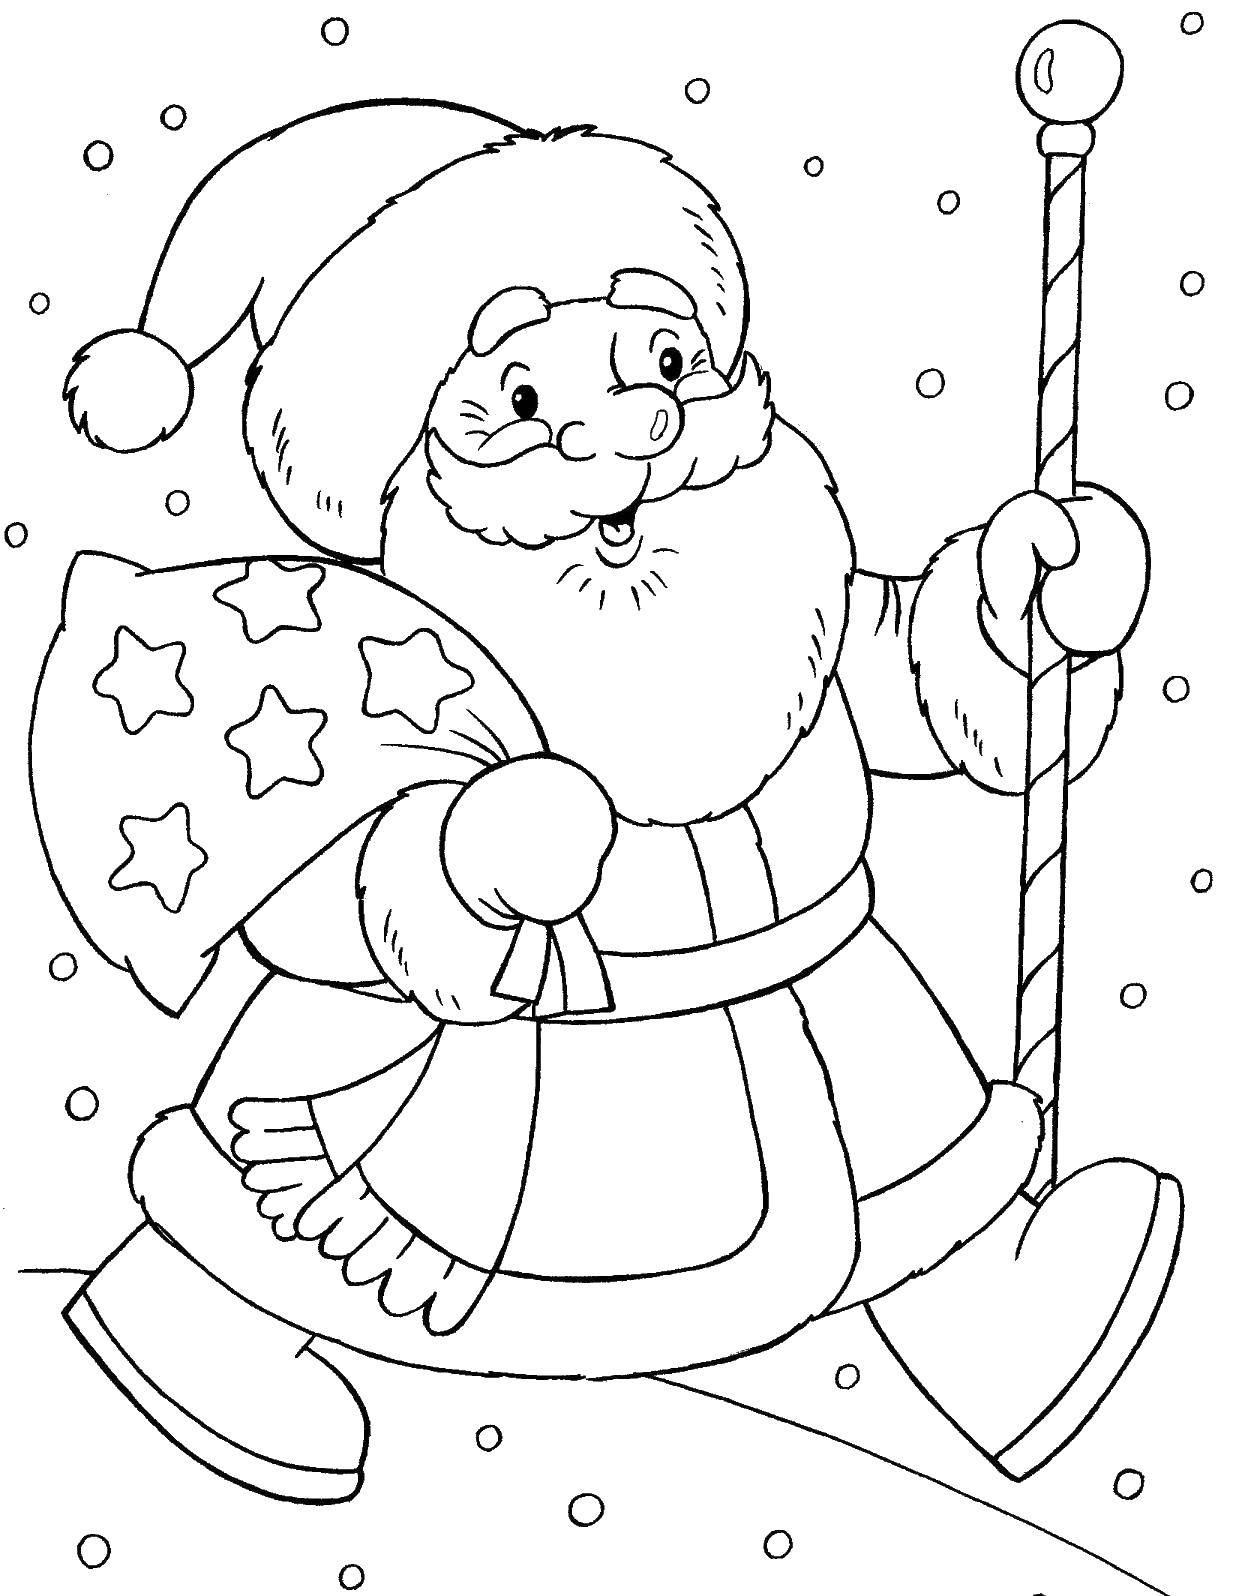 Coloring Santa Claus came to give presents. Category Santa Claus. Tags:  New Year, Santa Claus.